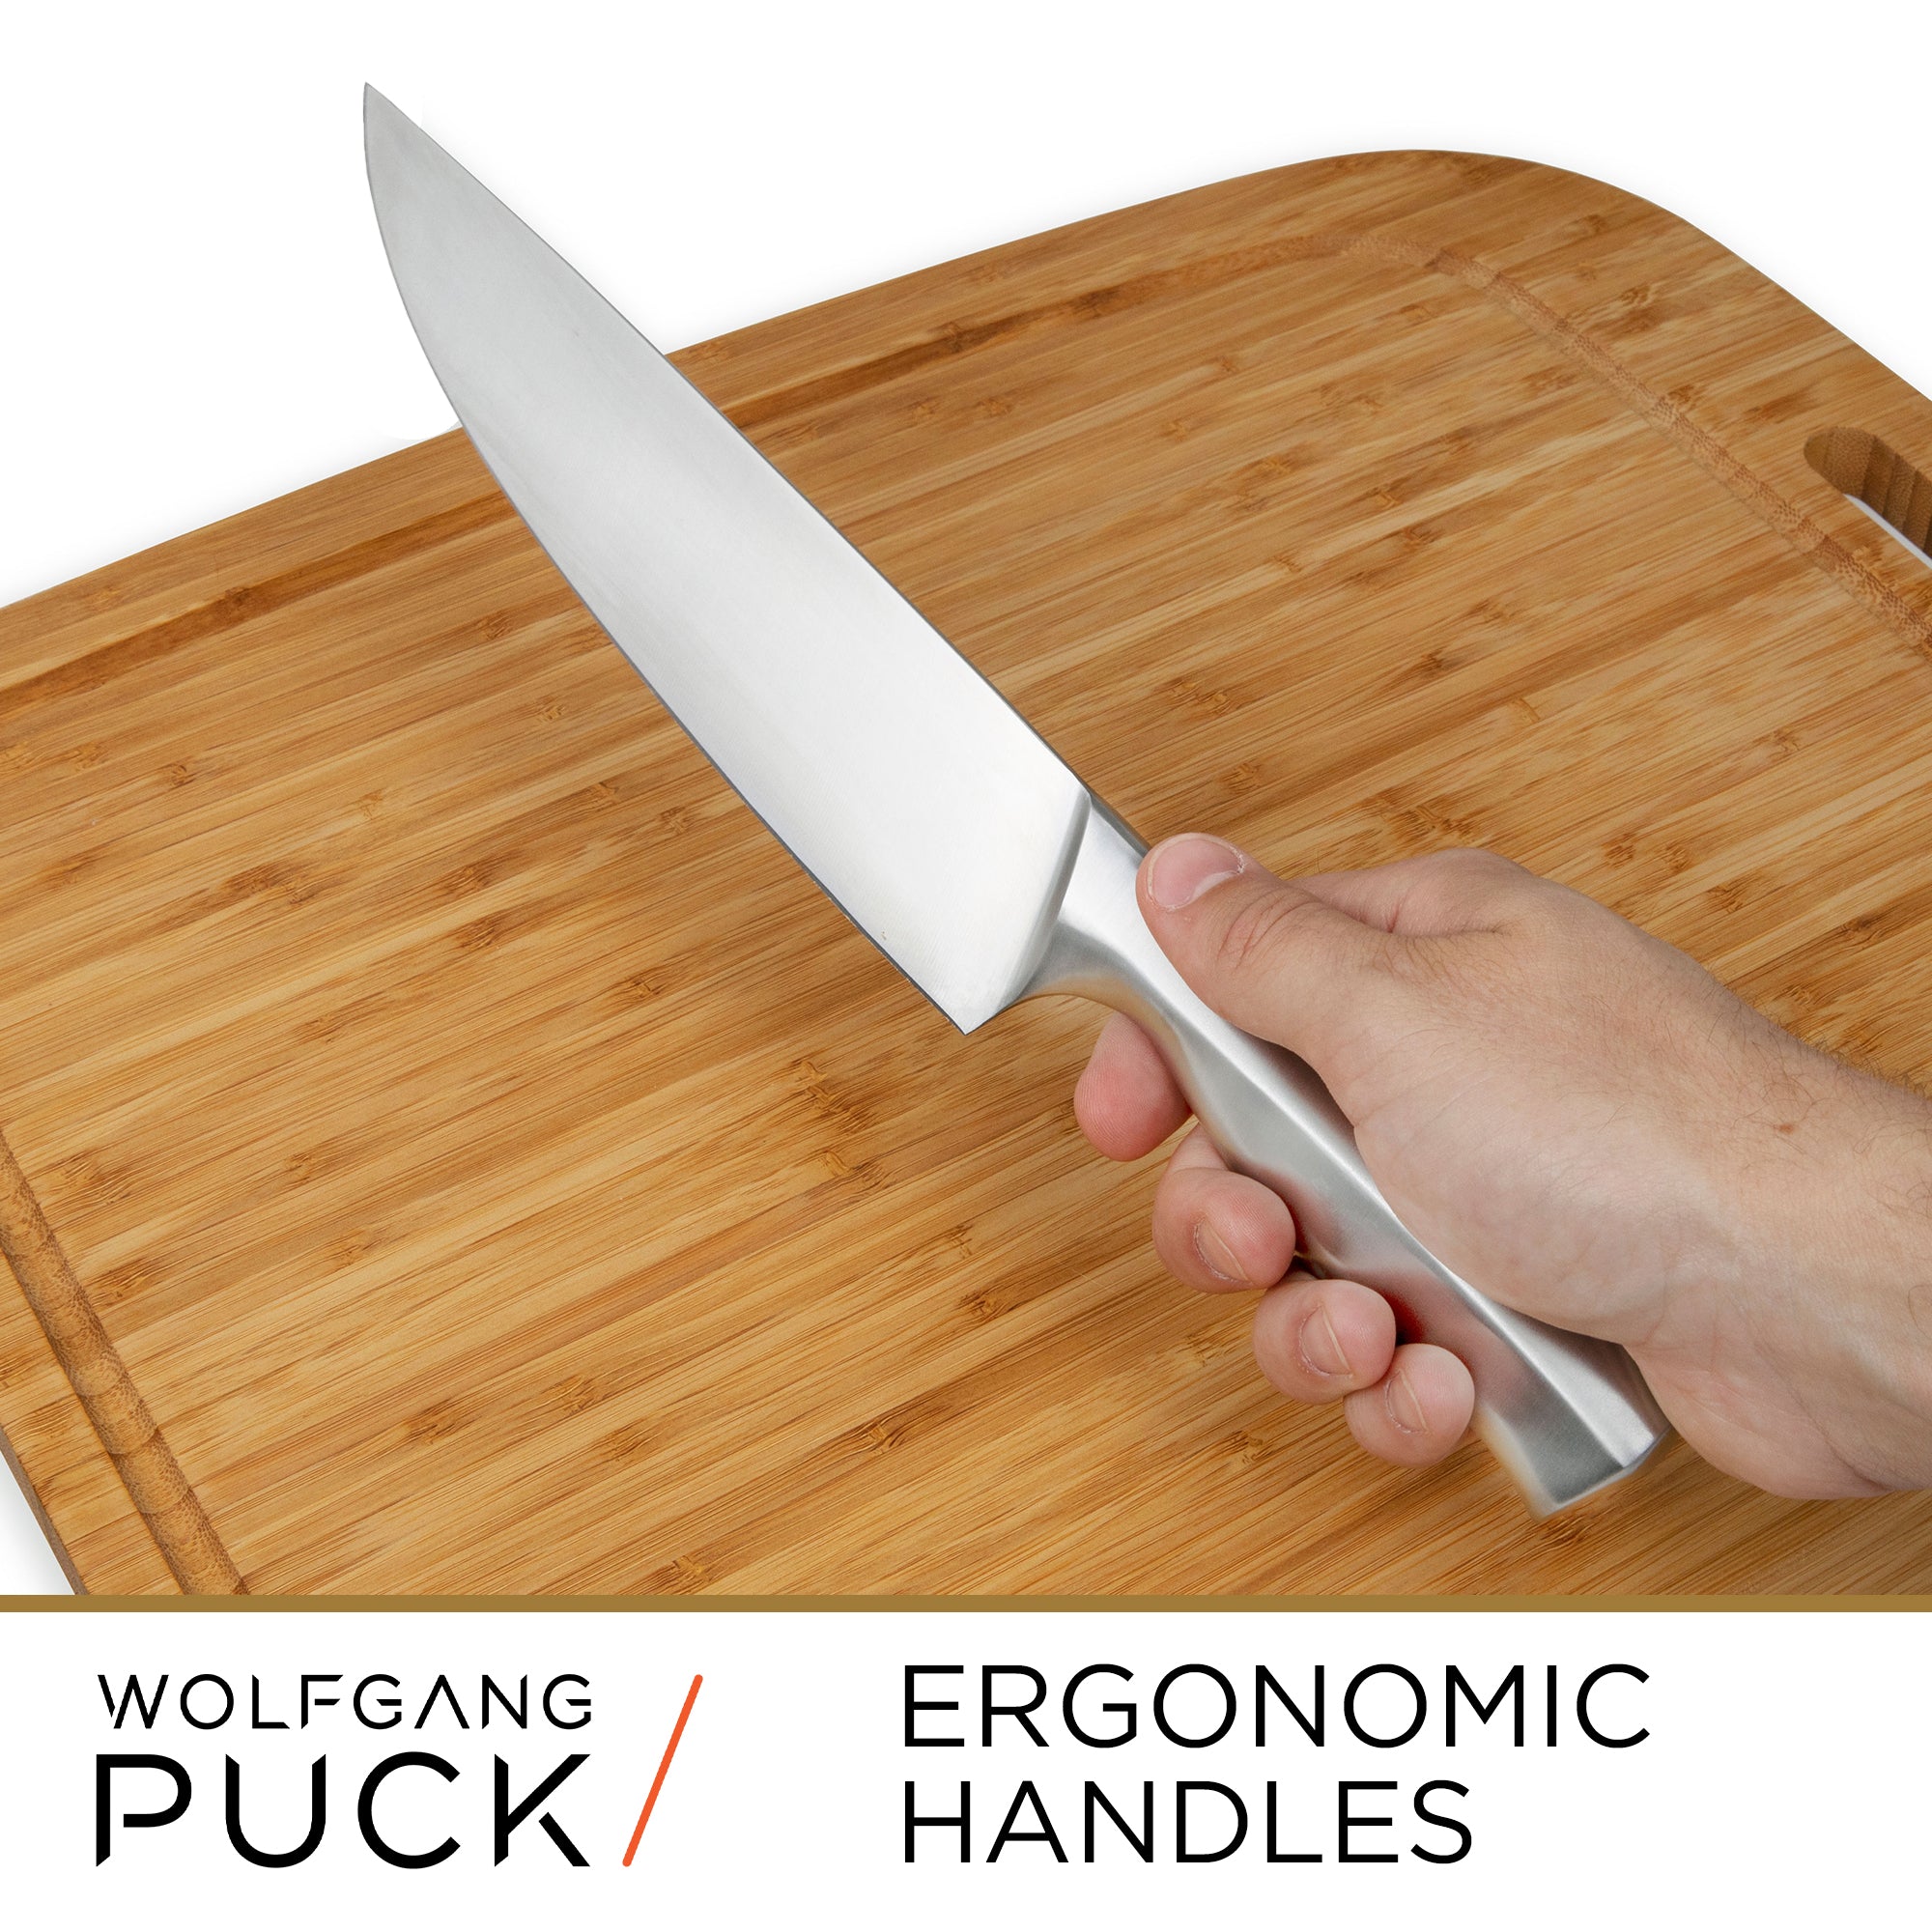 carbon stainless steel knife set with ergonomic handles